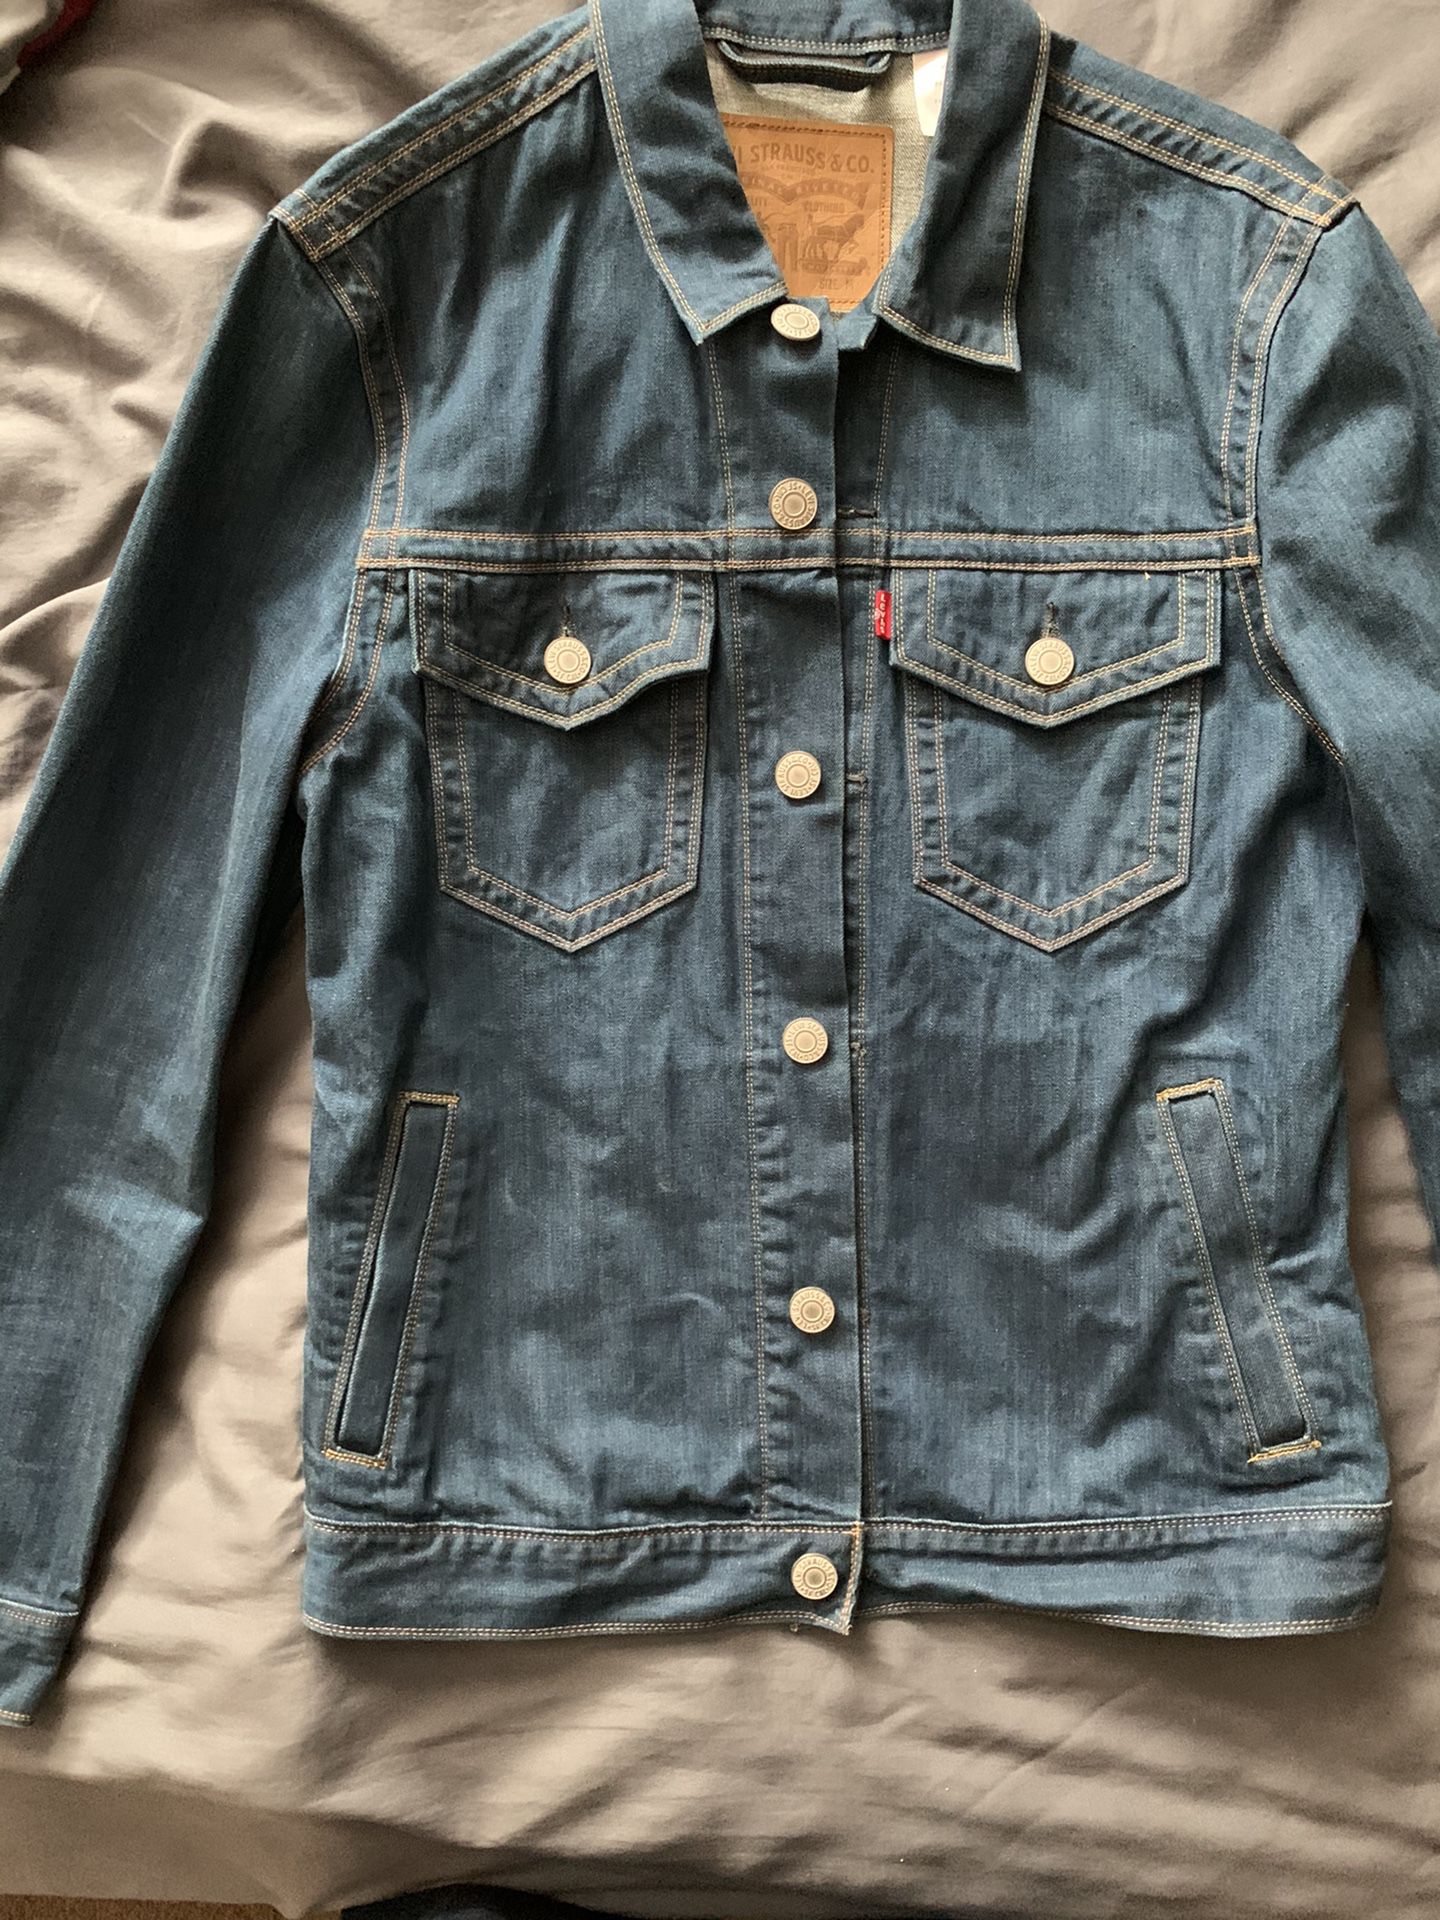 Slim fitting Levis Jean jacket size m worn a hand full of times